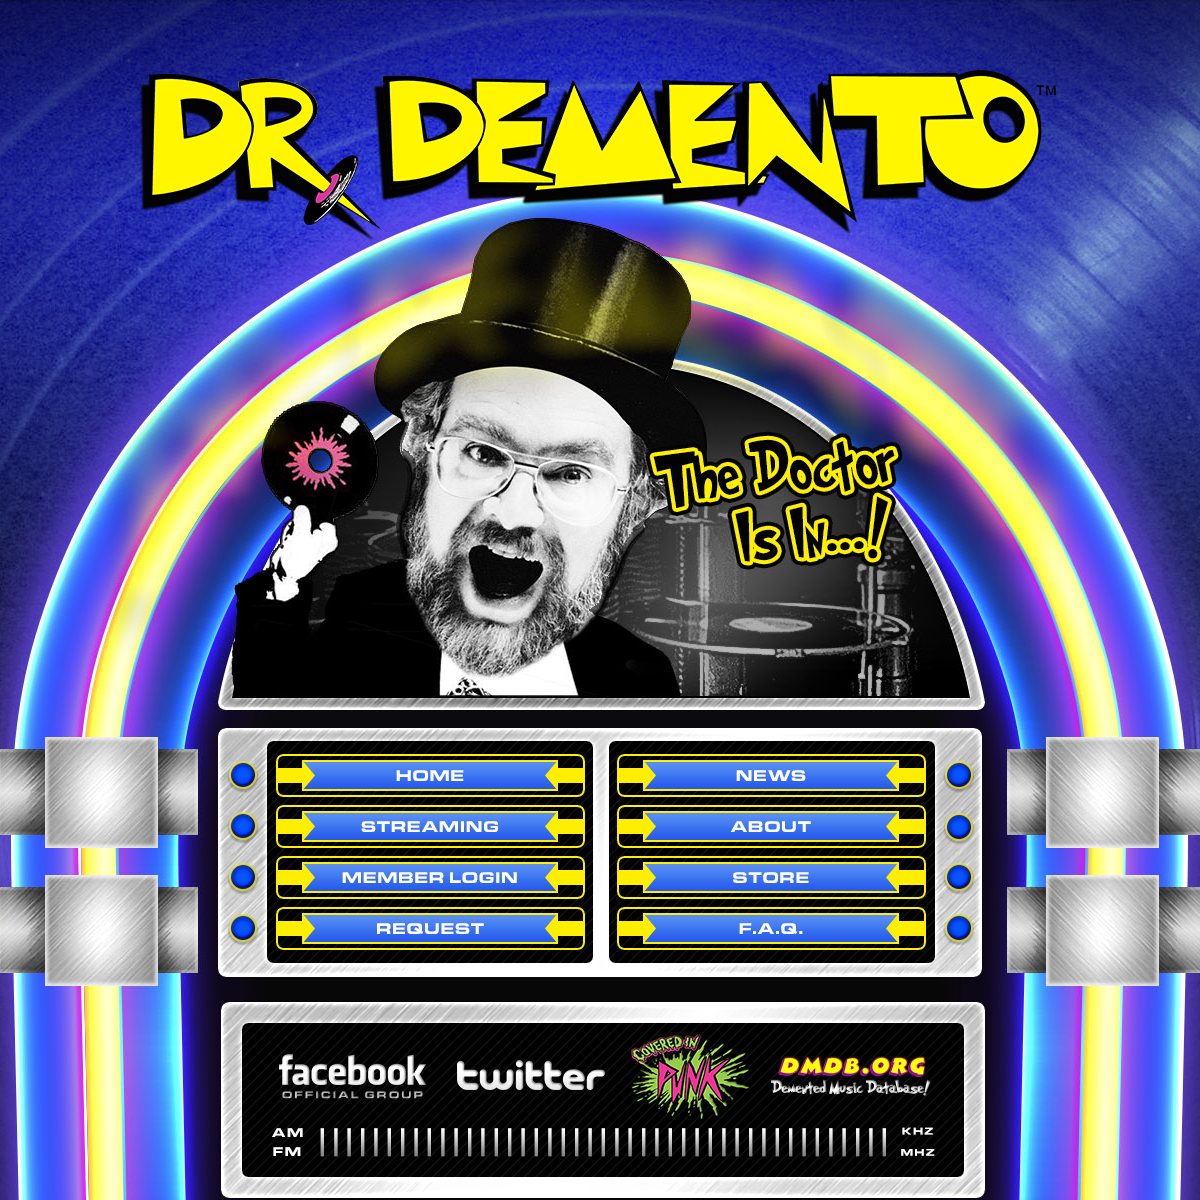 A complete backup of drdemento.com